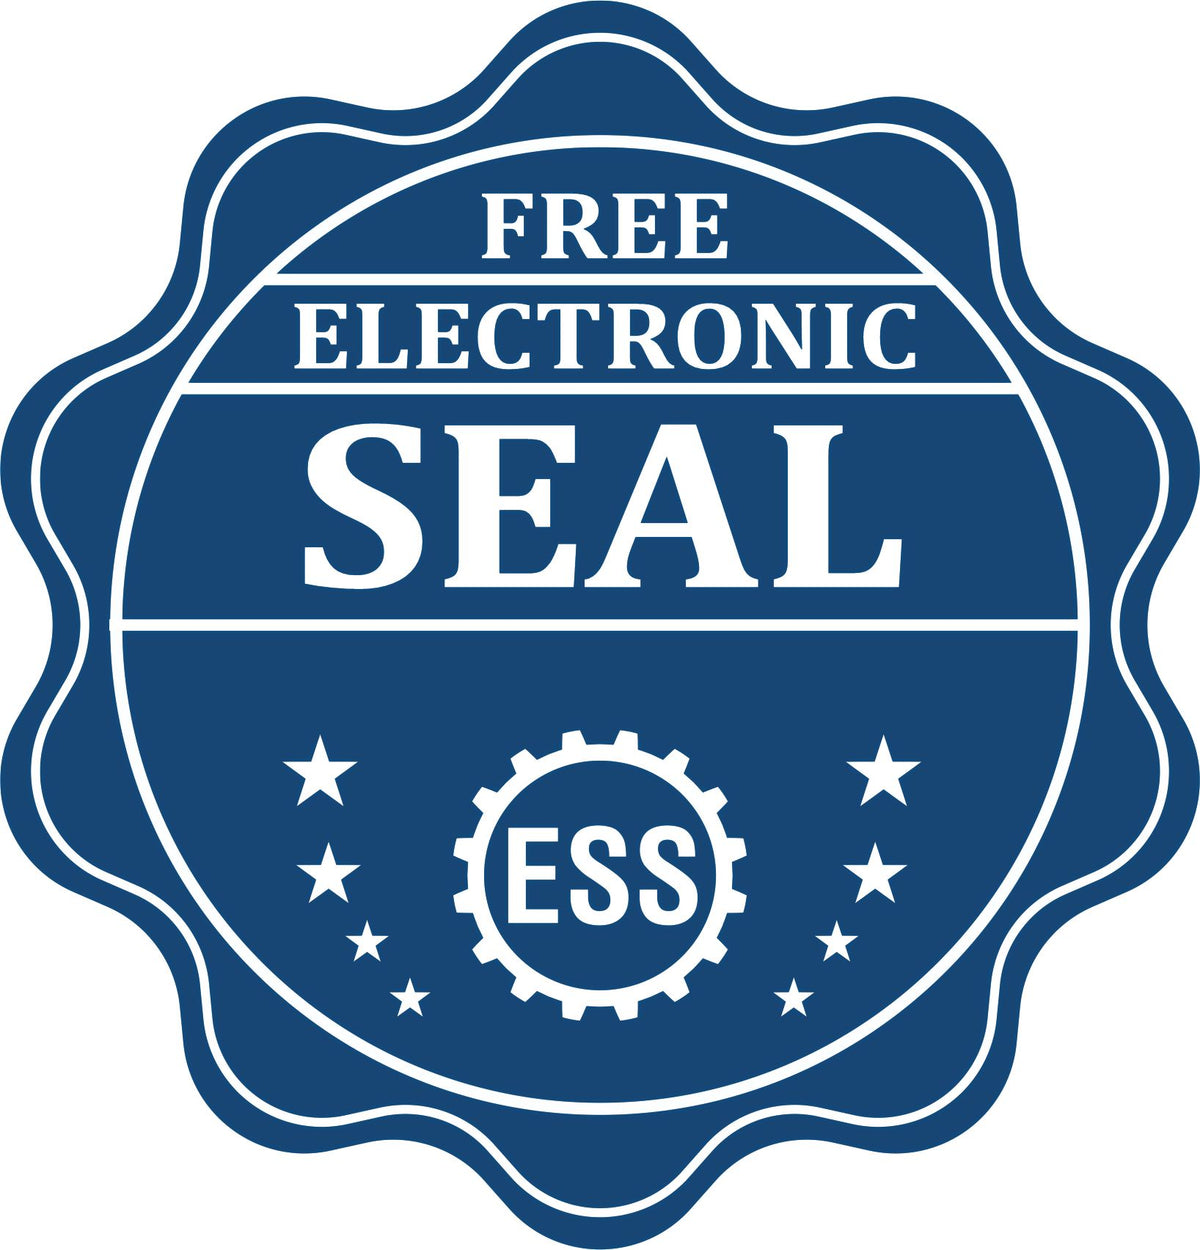 A badge showing a free electronic seal for the Slim Pre-Inked District of Columbia Professional Geologist Seal Stamp with stars and the ESS gear on the emblem.